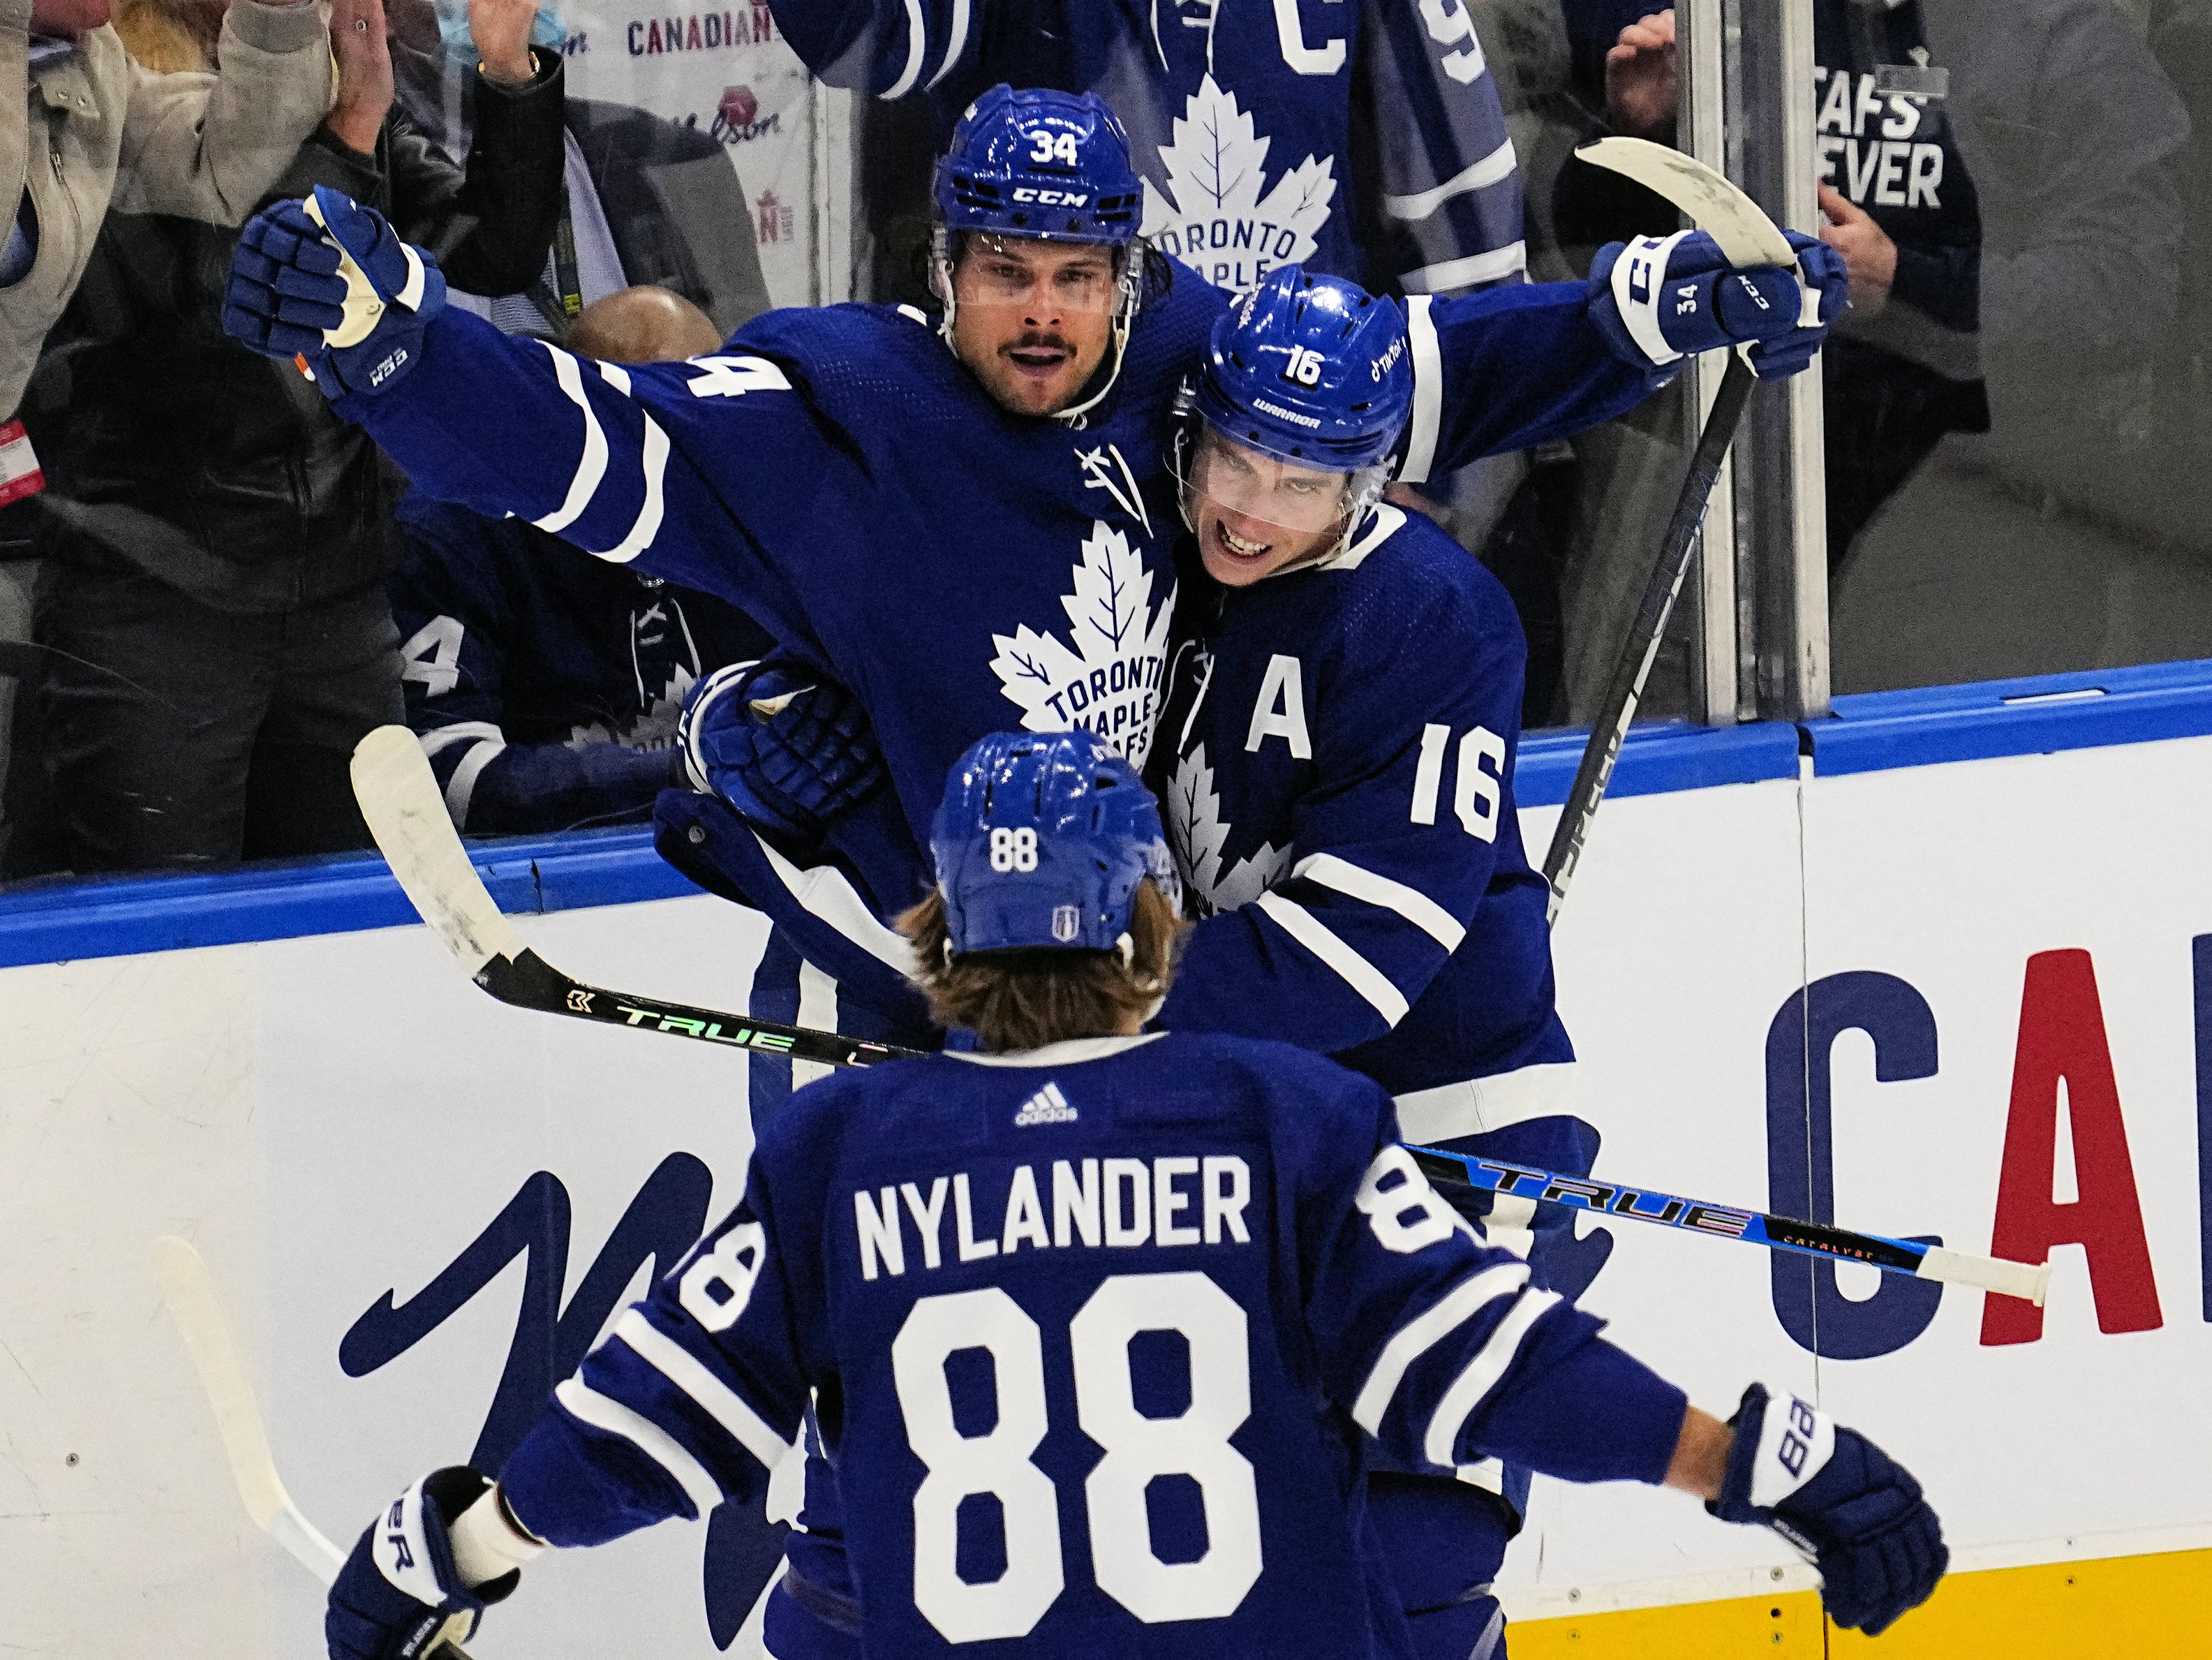 NHL Notebook: Toronto Maple Leafs forward Auston Matthews out “at